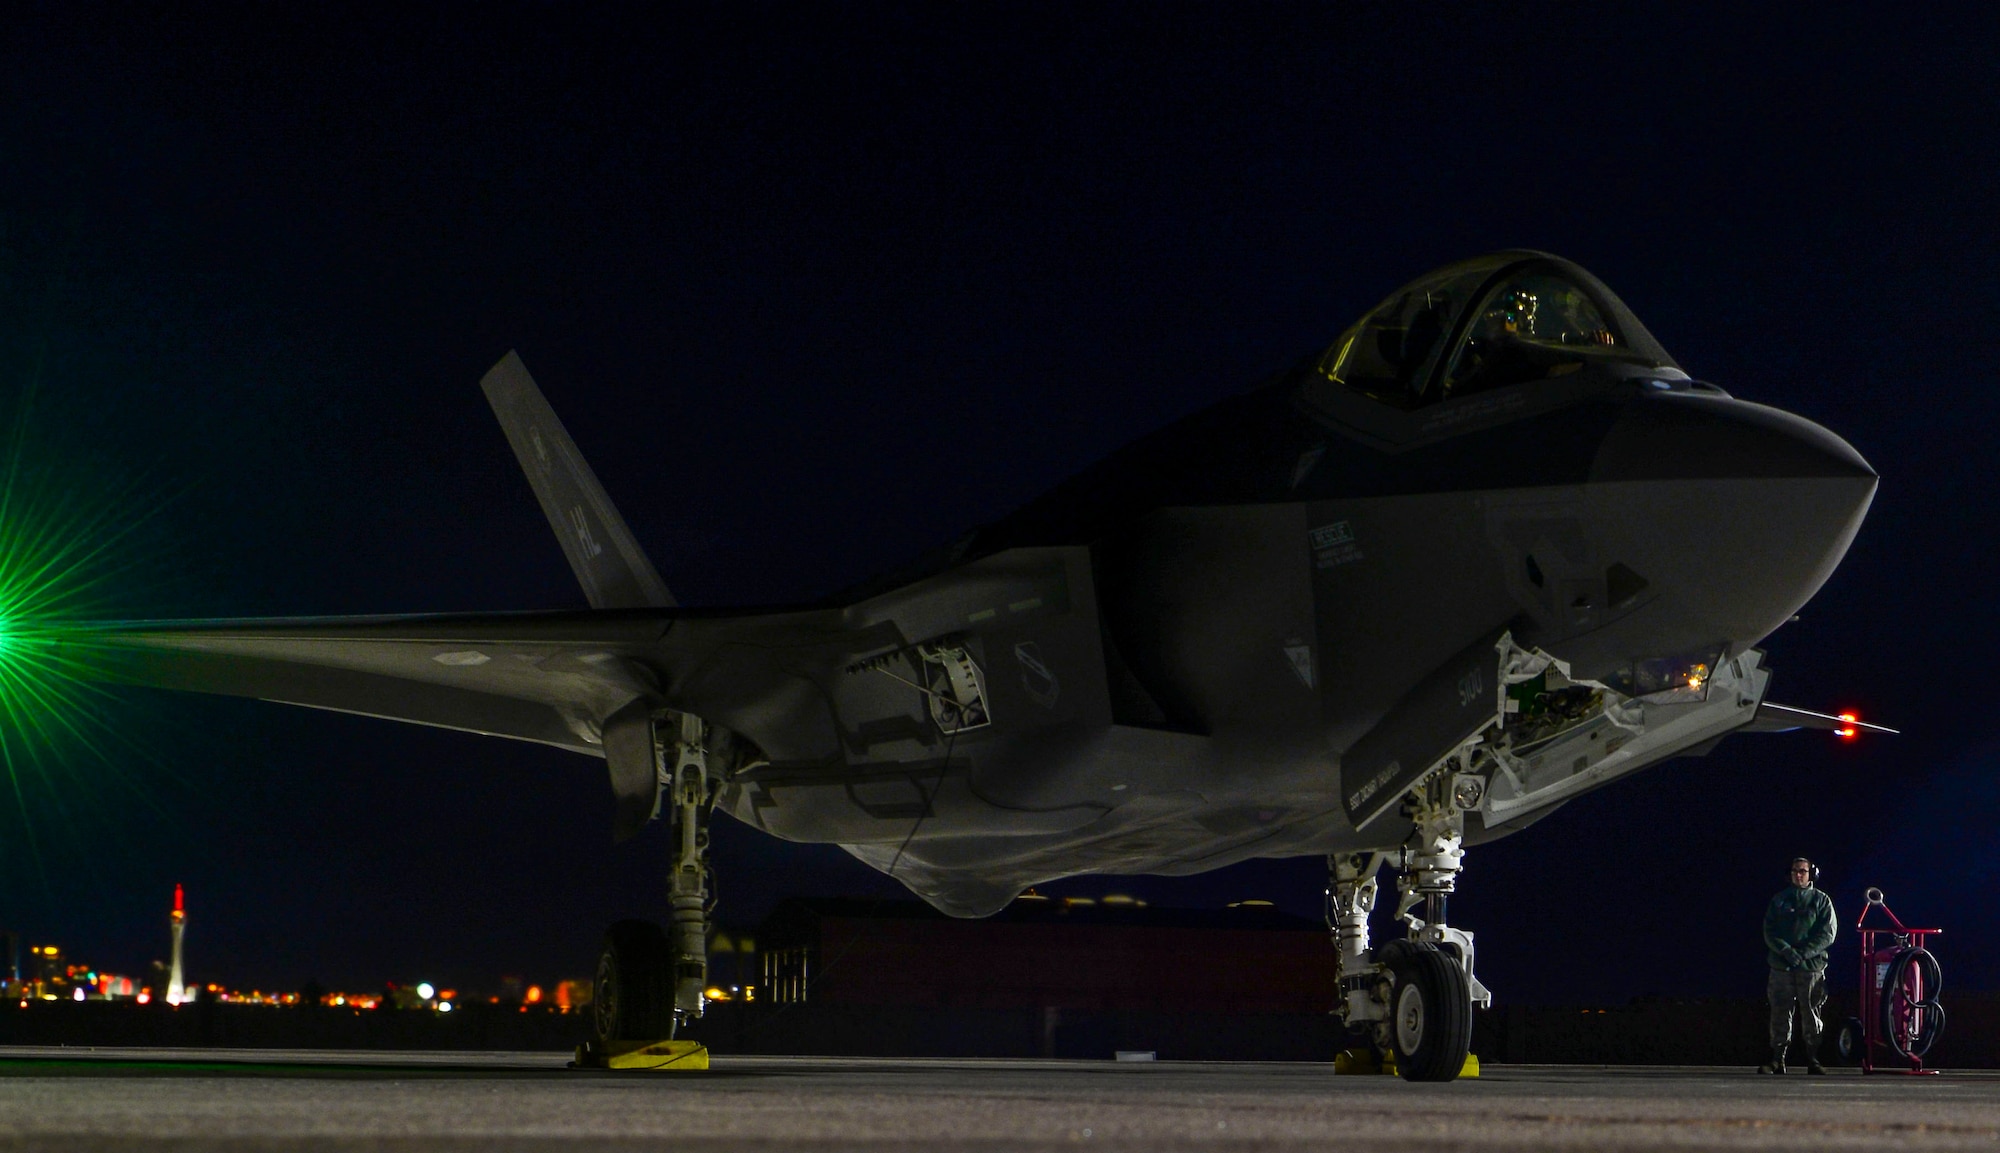 An F-35A Lightning II from Hill Air Force Base, Utah, sits on the flightline at Nellis Air Force Base, Nev., during Red Flag 17-1, Jan. 24, 2017. The F-35’s exceptional survivability is achieved through a combination of low-observable technologies, advanced electronic attack and electronic protection, and shared situational awareness. (U.S. Air Force photo by Airman 1st Class Nathan Byrnes/Released)